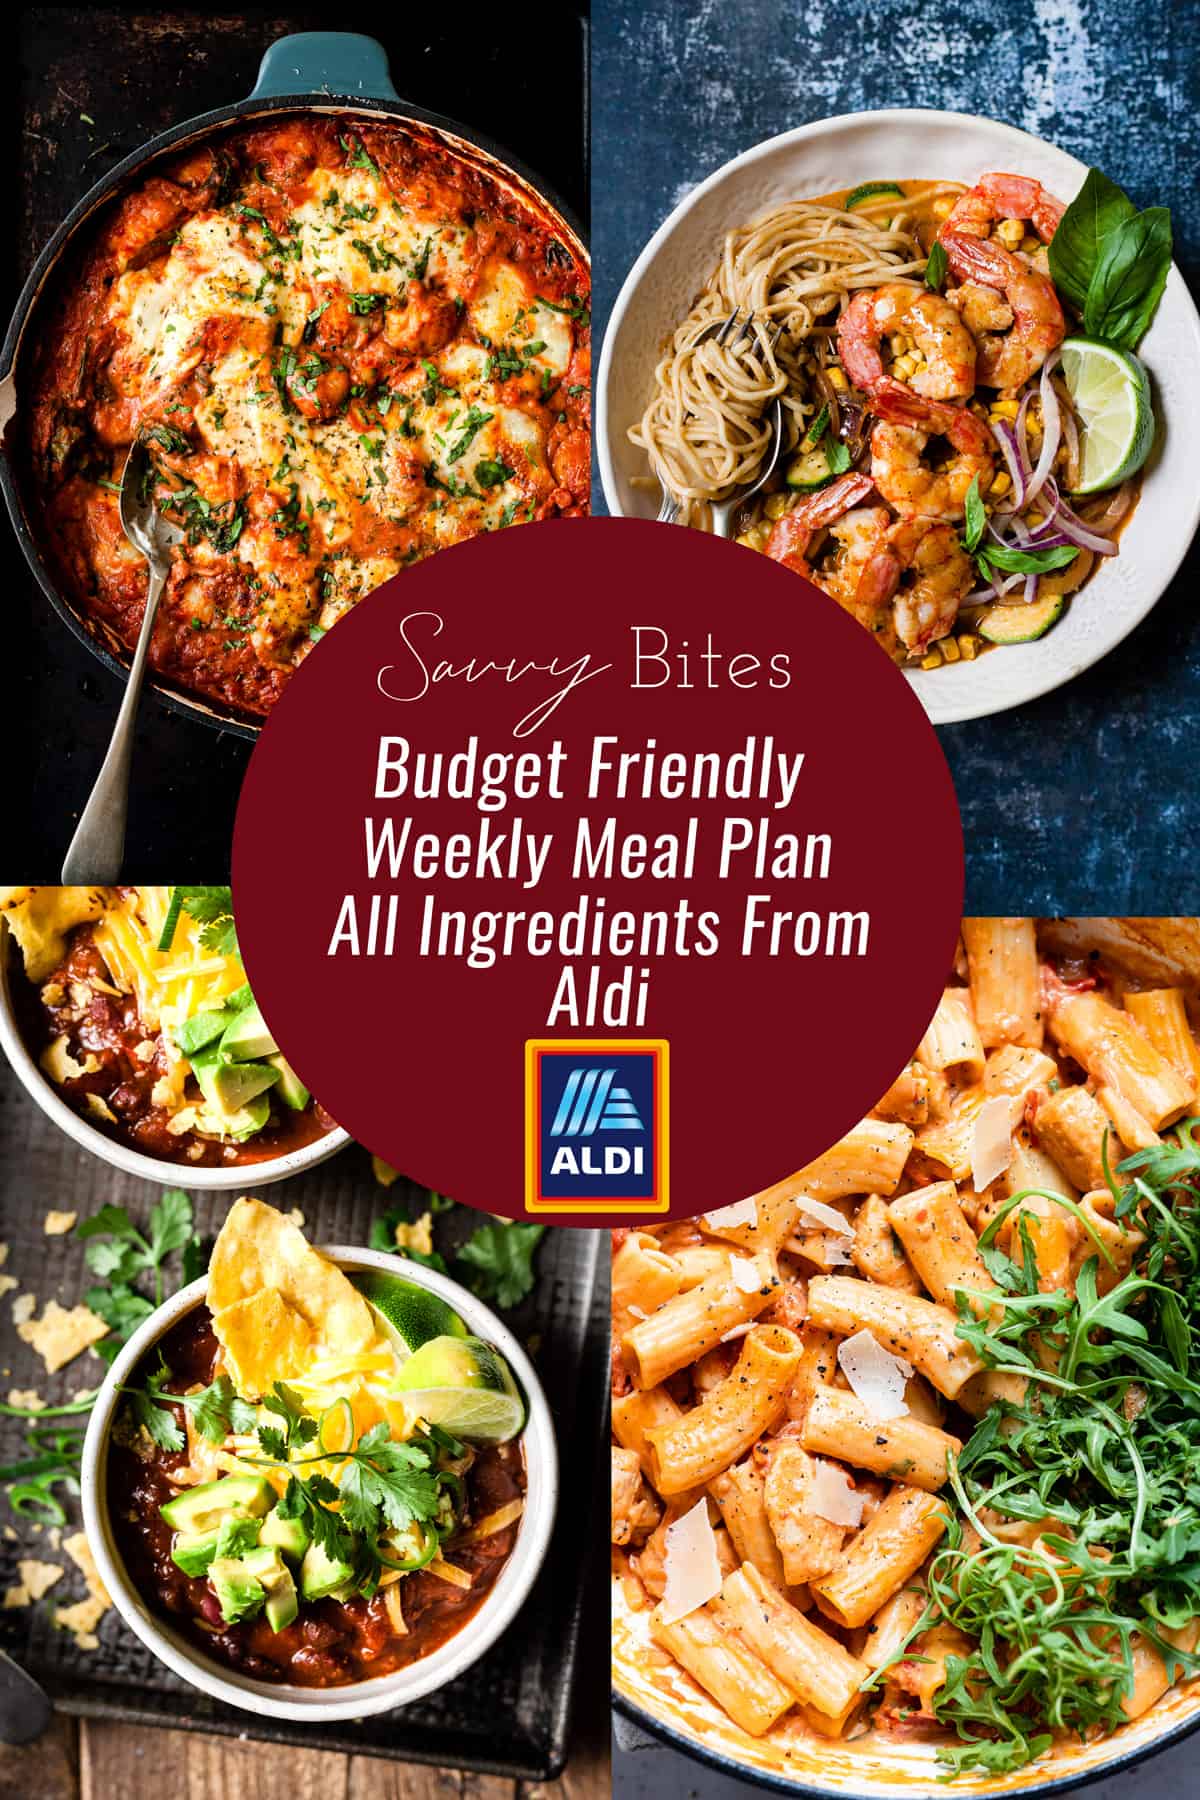 Aldi budget meal plan photos and recipes in a collage.